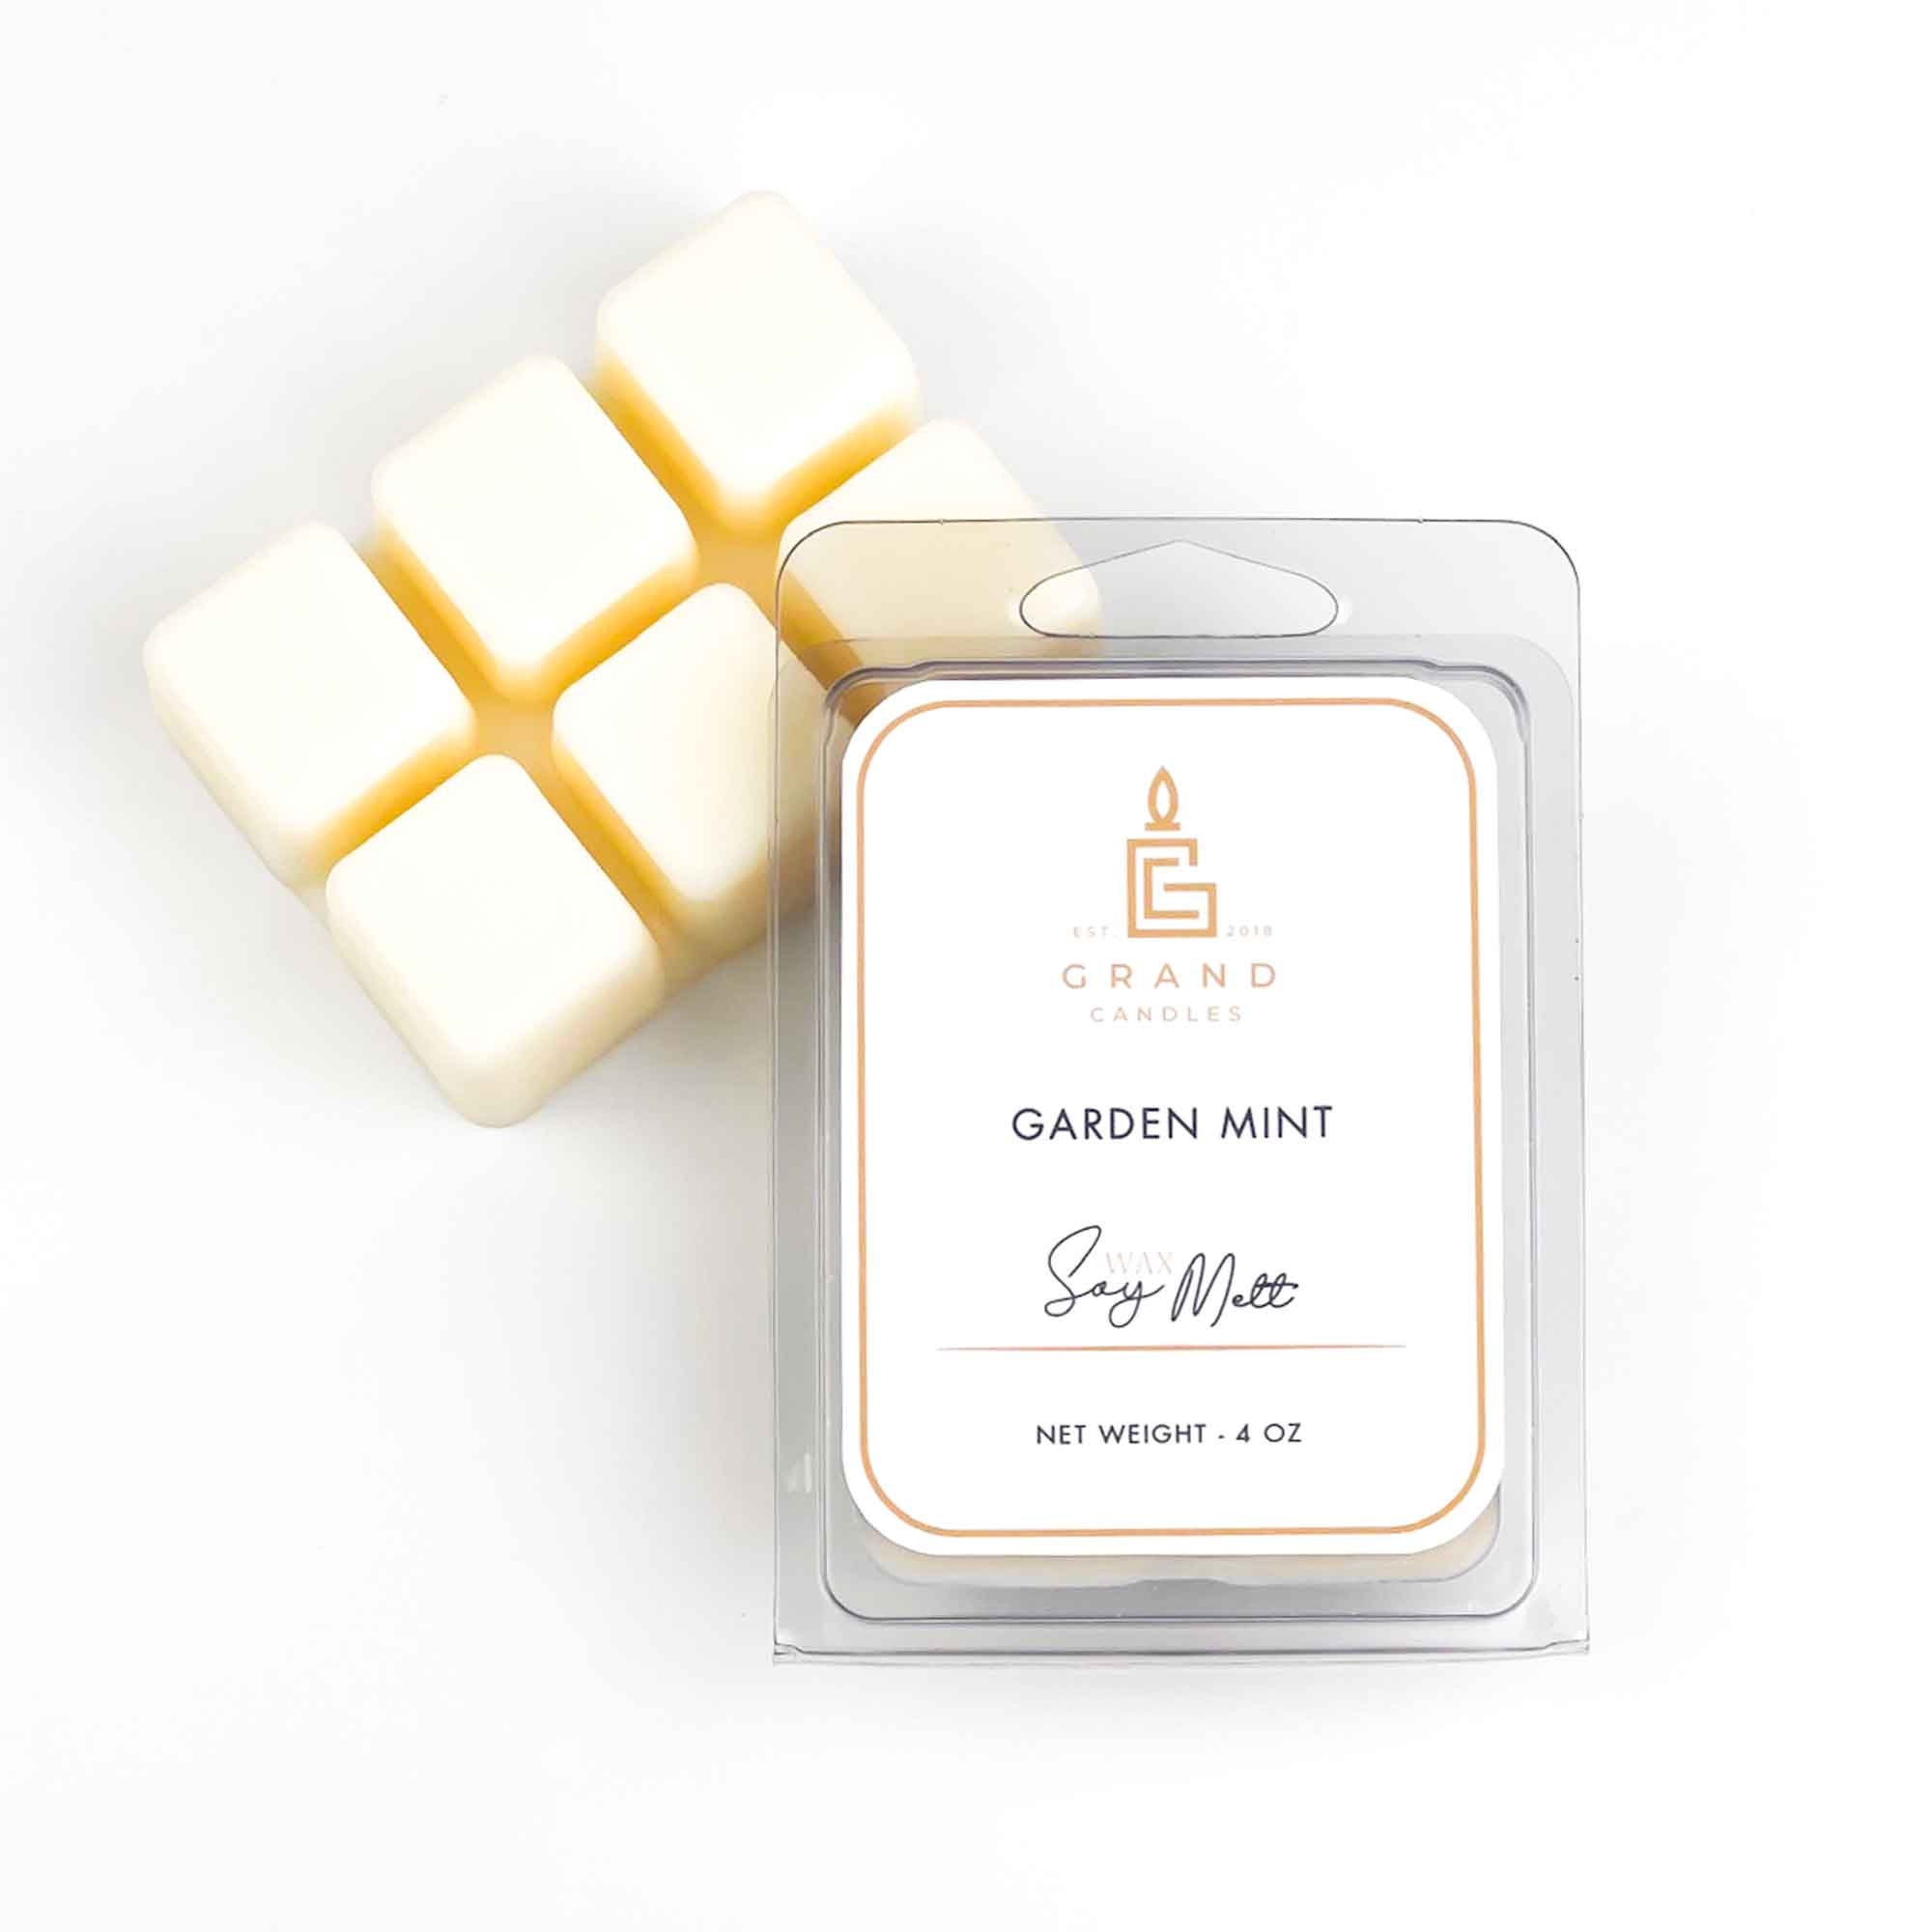 Omg Pristine Wax Melts (Garden Series) are AMAZING! They are made of